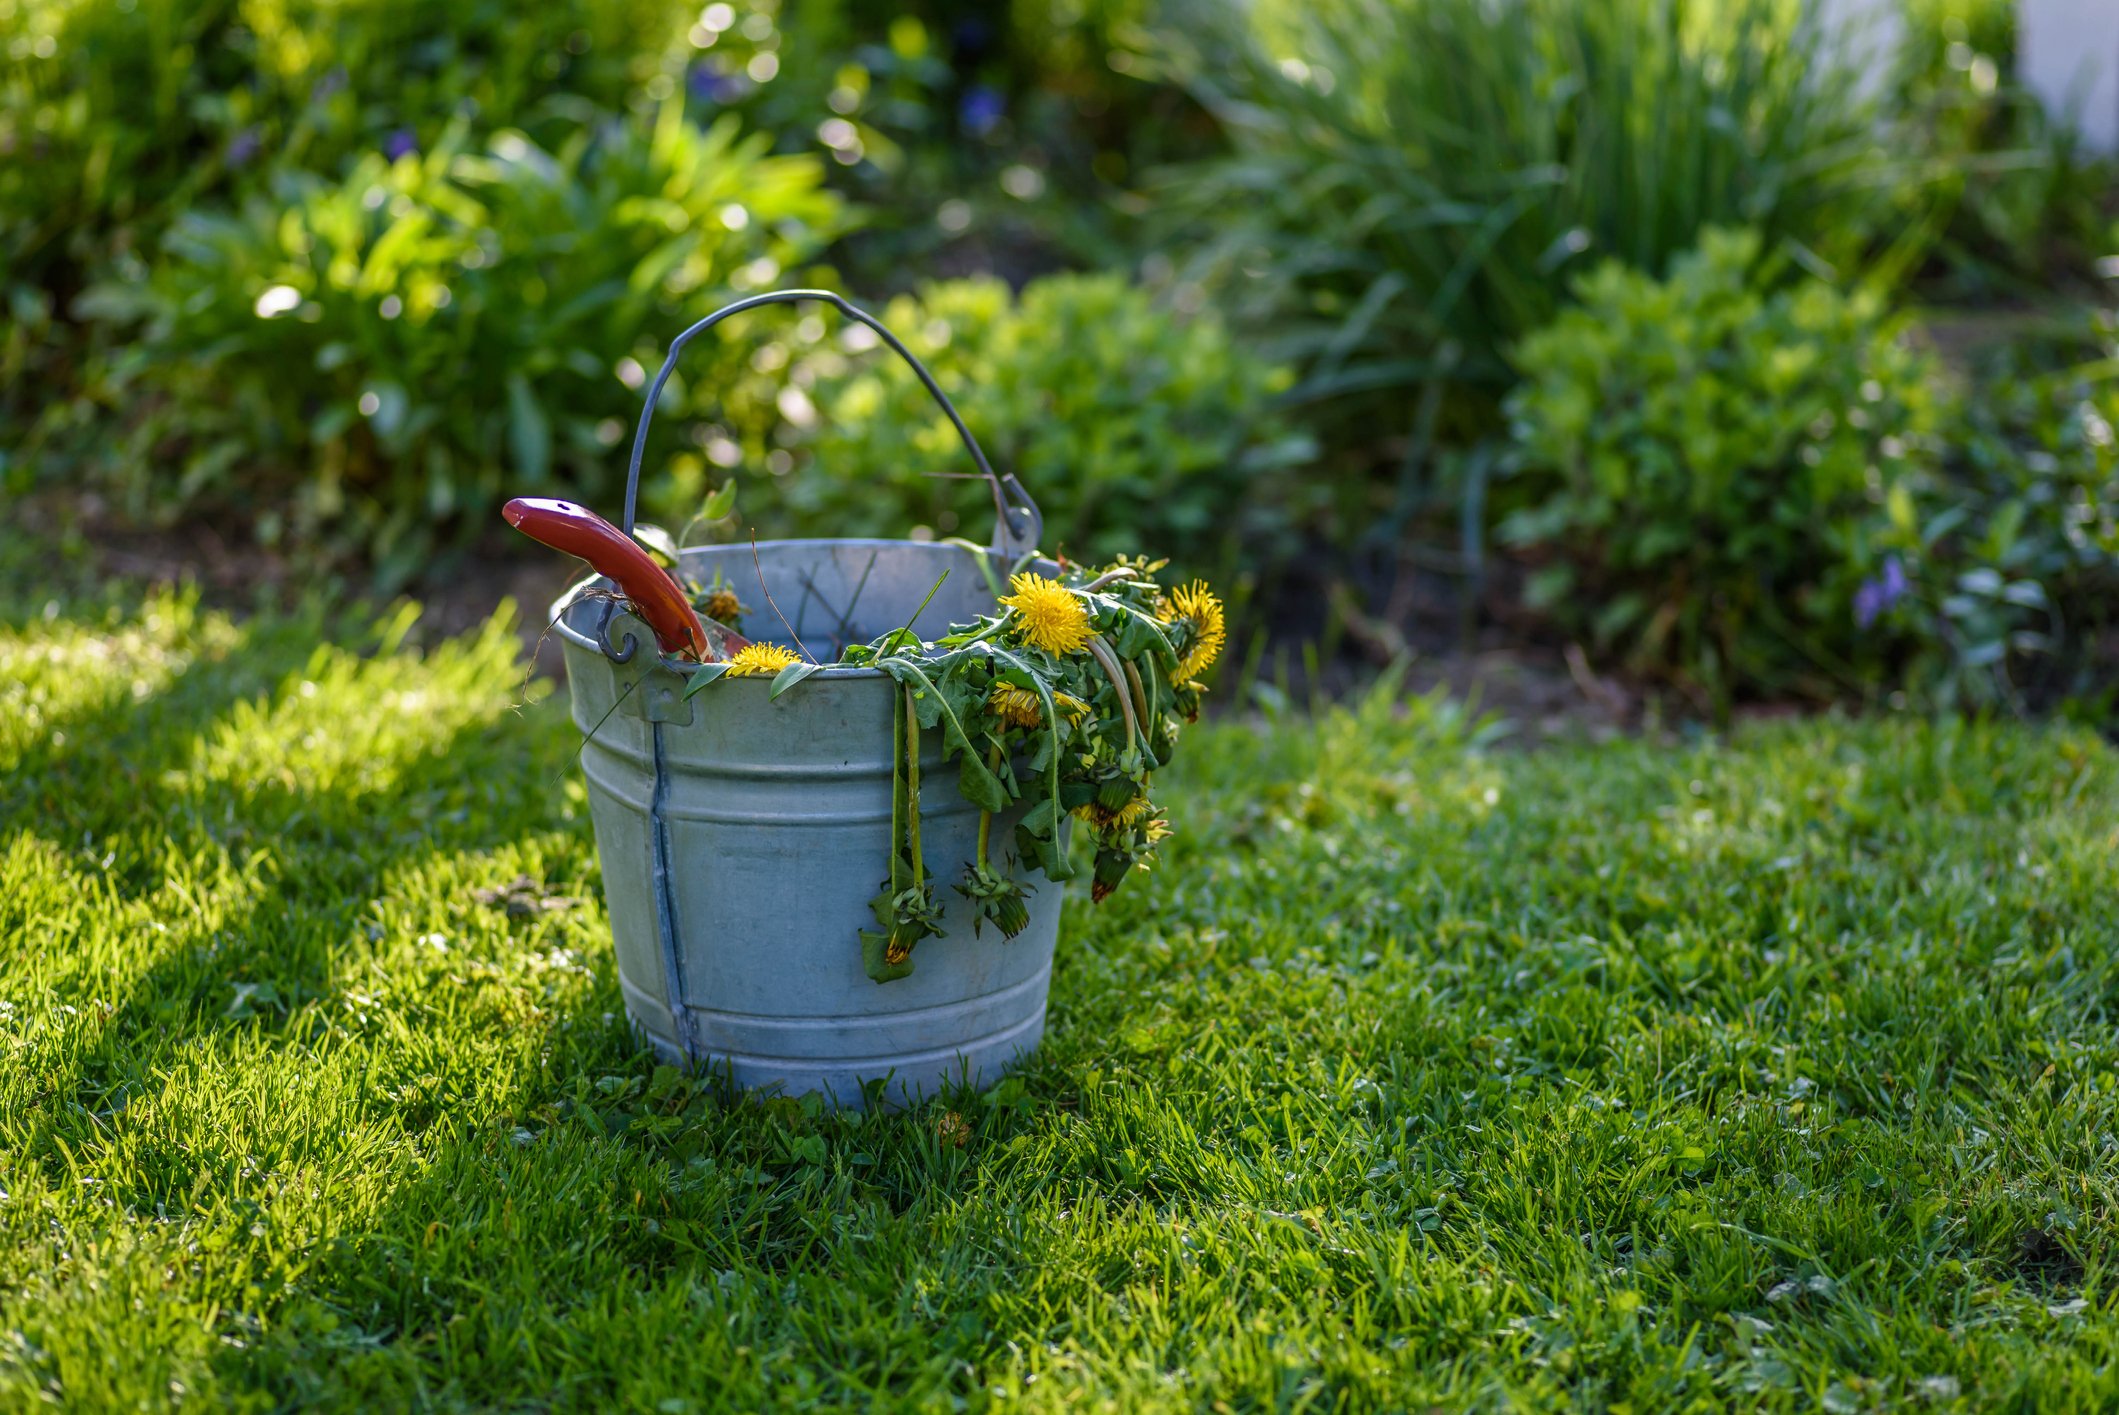 A thick, fertile lawn will help combat the growth of weeds.